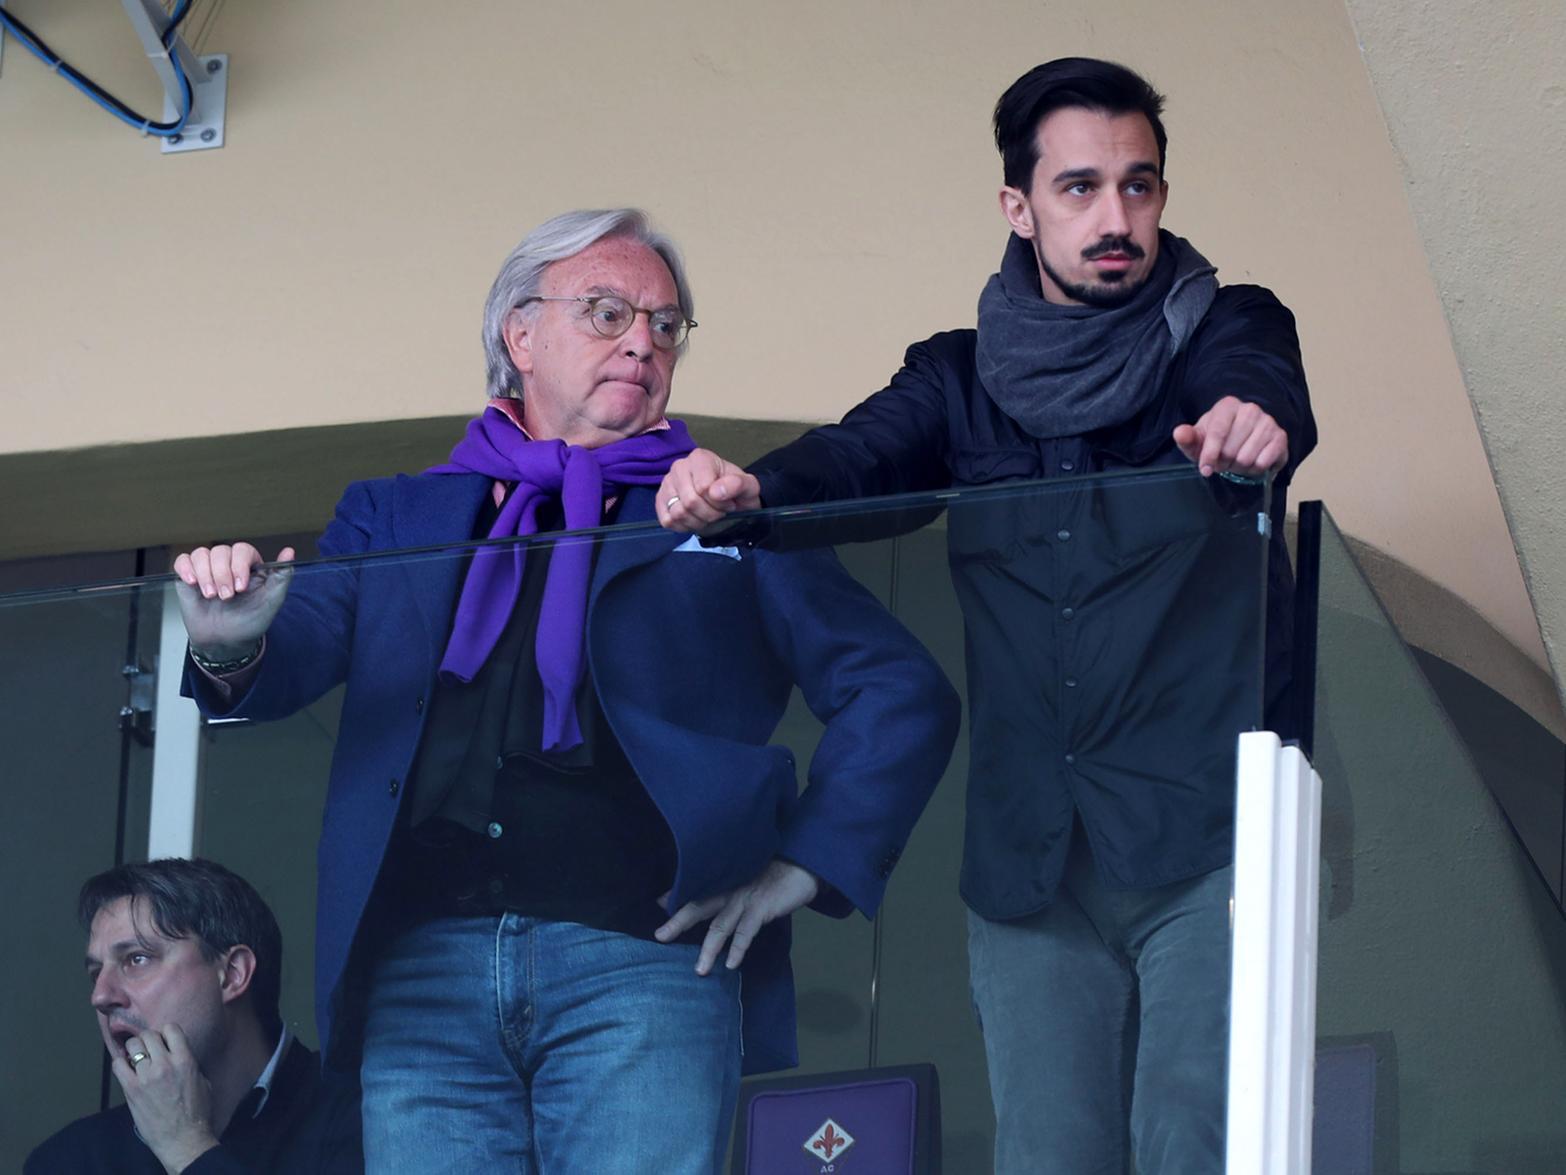 Rumours suggesting that Sheffield Wednesday could be sold to ex-Fiorentina owner Diego Della Valle have been quashed, with reporter Alan Nixon claiming Dejphon Chansiri currently has no plans to sell.(The Sun)